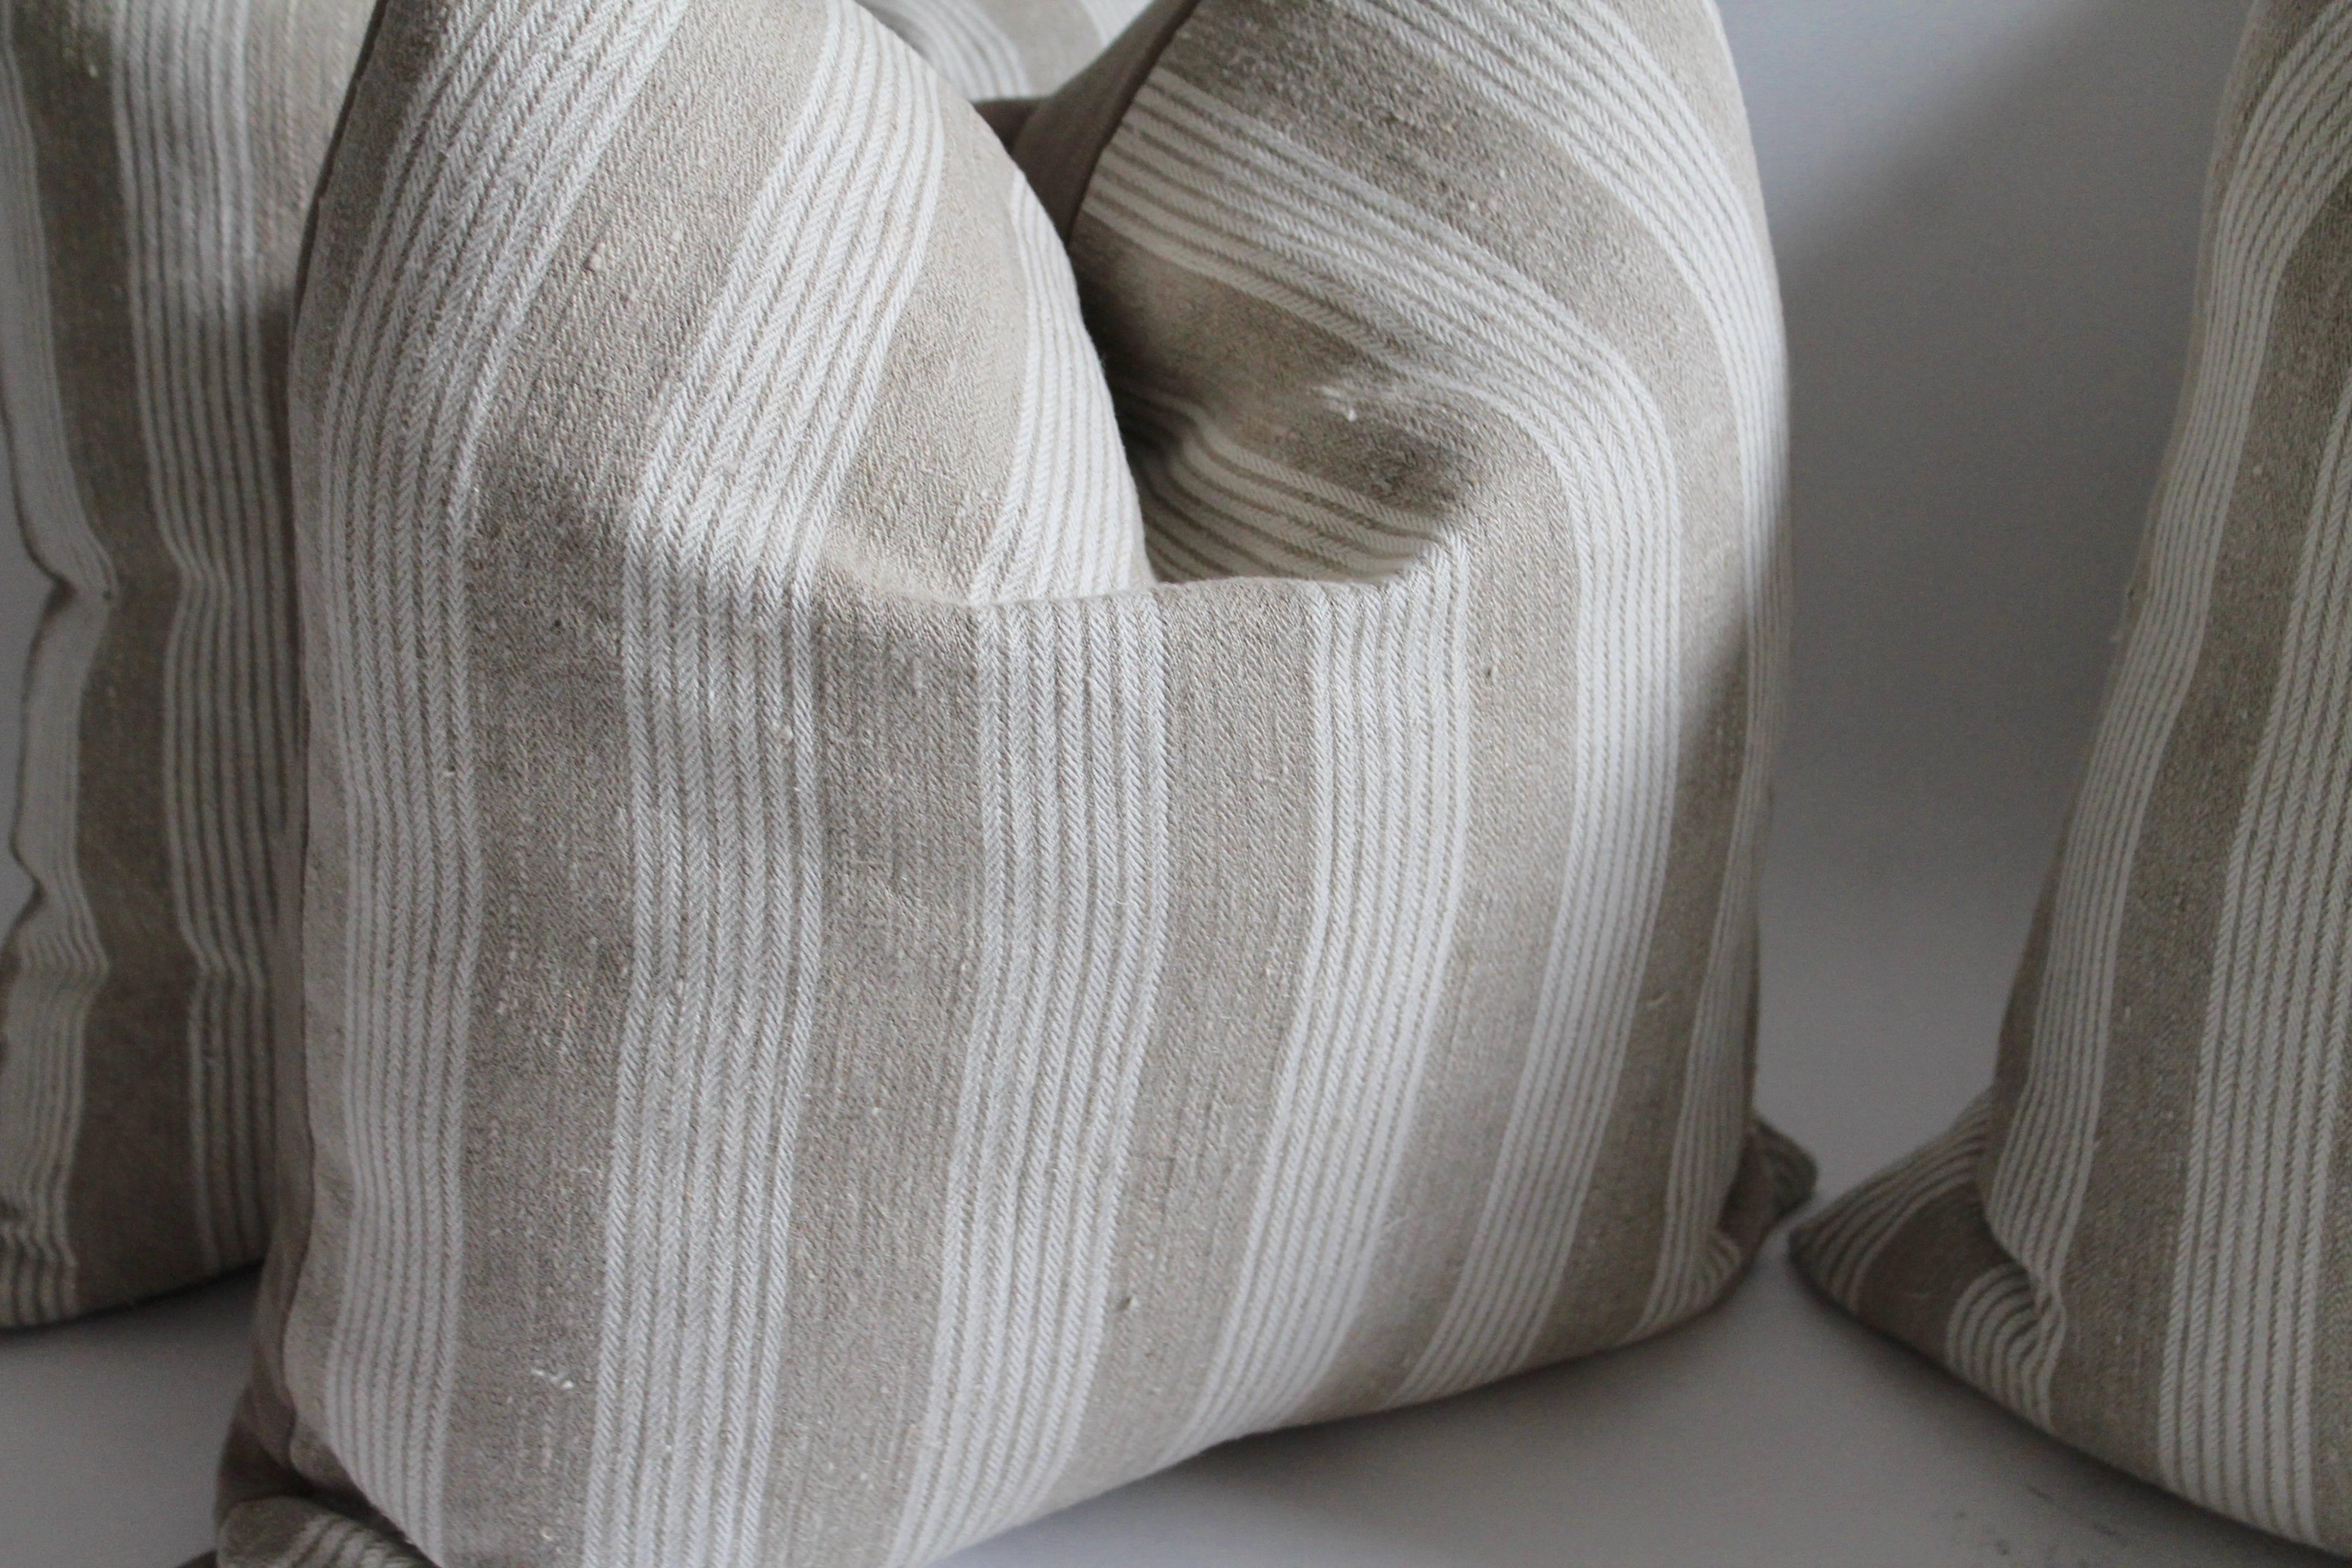 These fine striped home spun linen pillows are sold in pairs or all four as a collection. The backing is a cream cotton linen. 795.00 pair / 1395.00 for the four. All in fine condition.